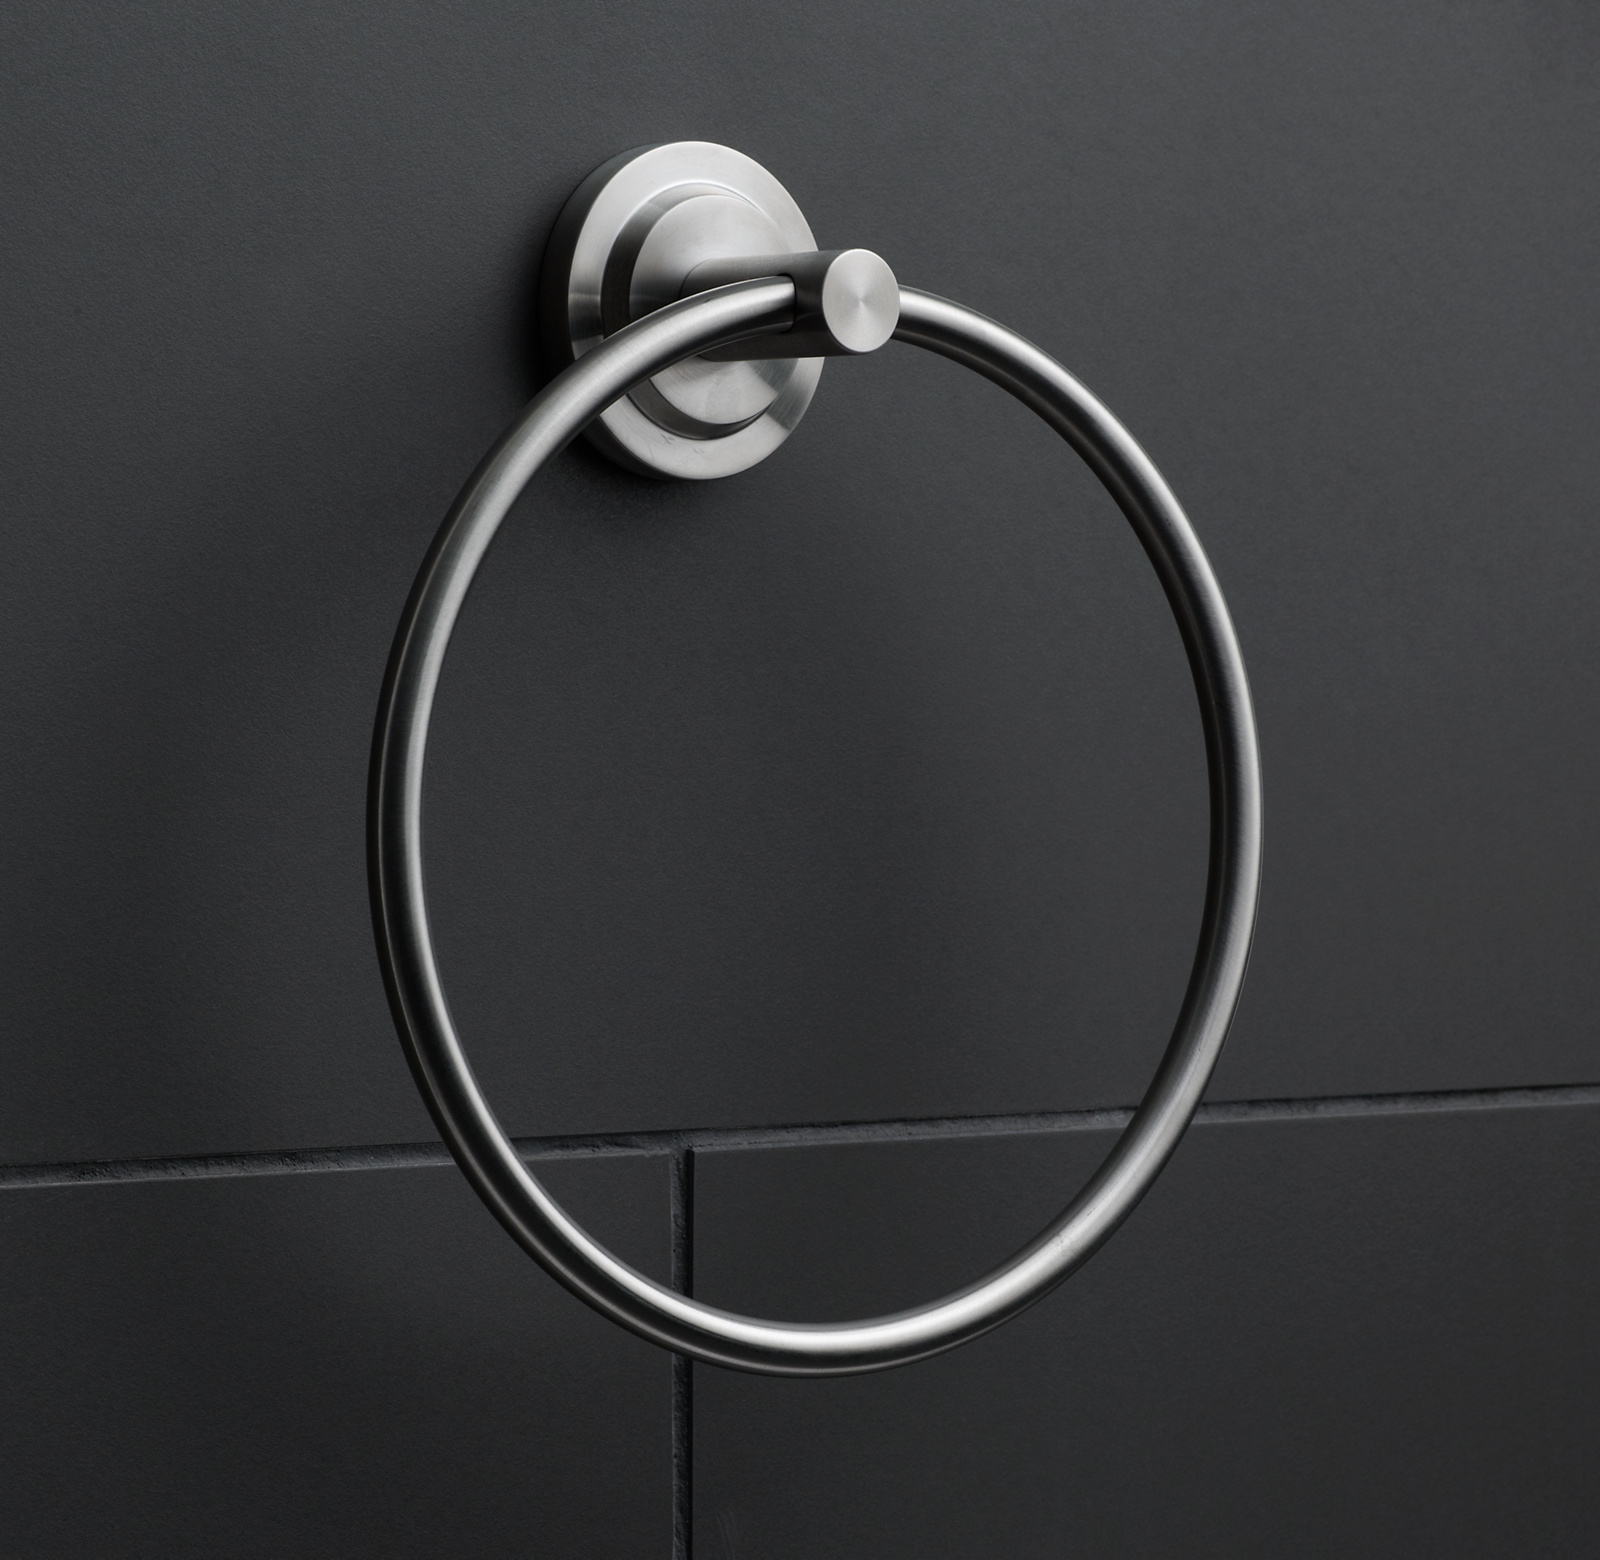 Shown in Satin Stainless Steel.